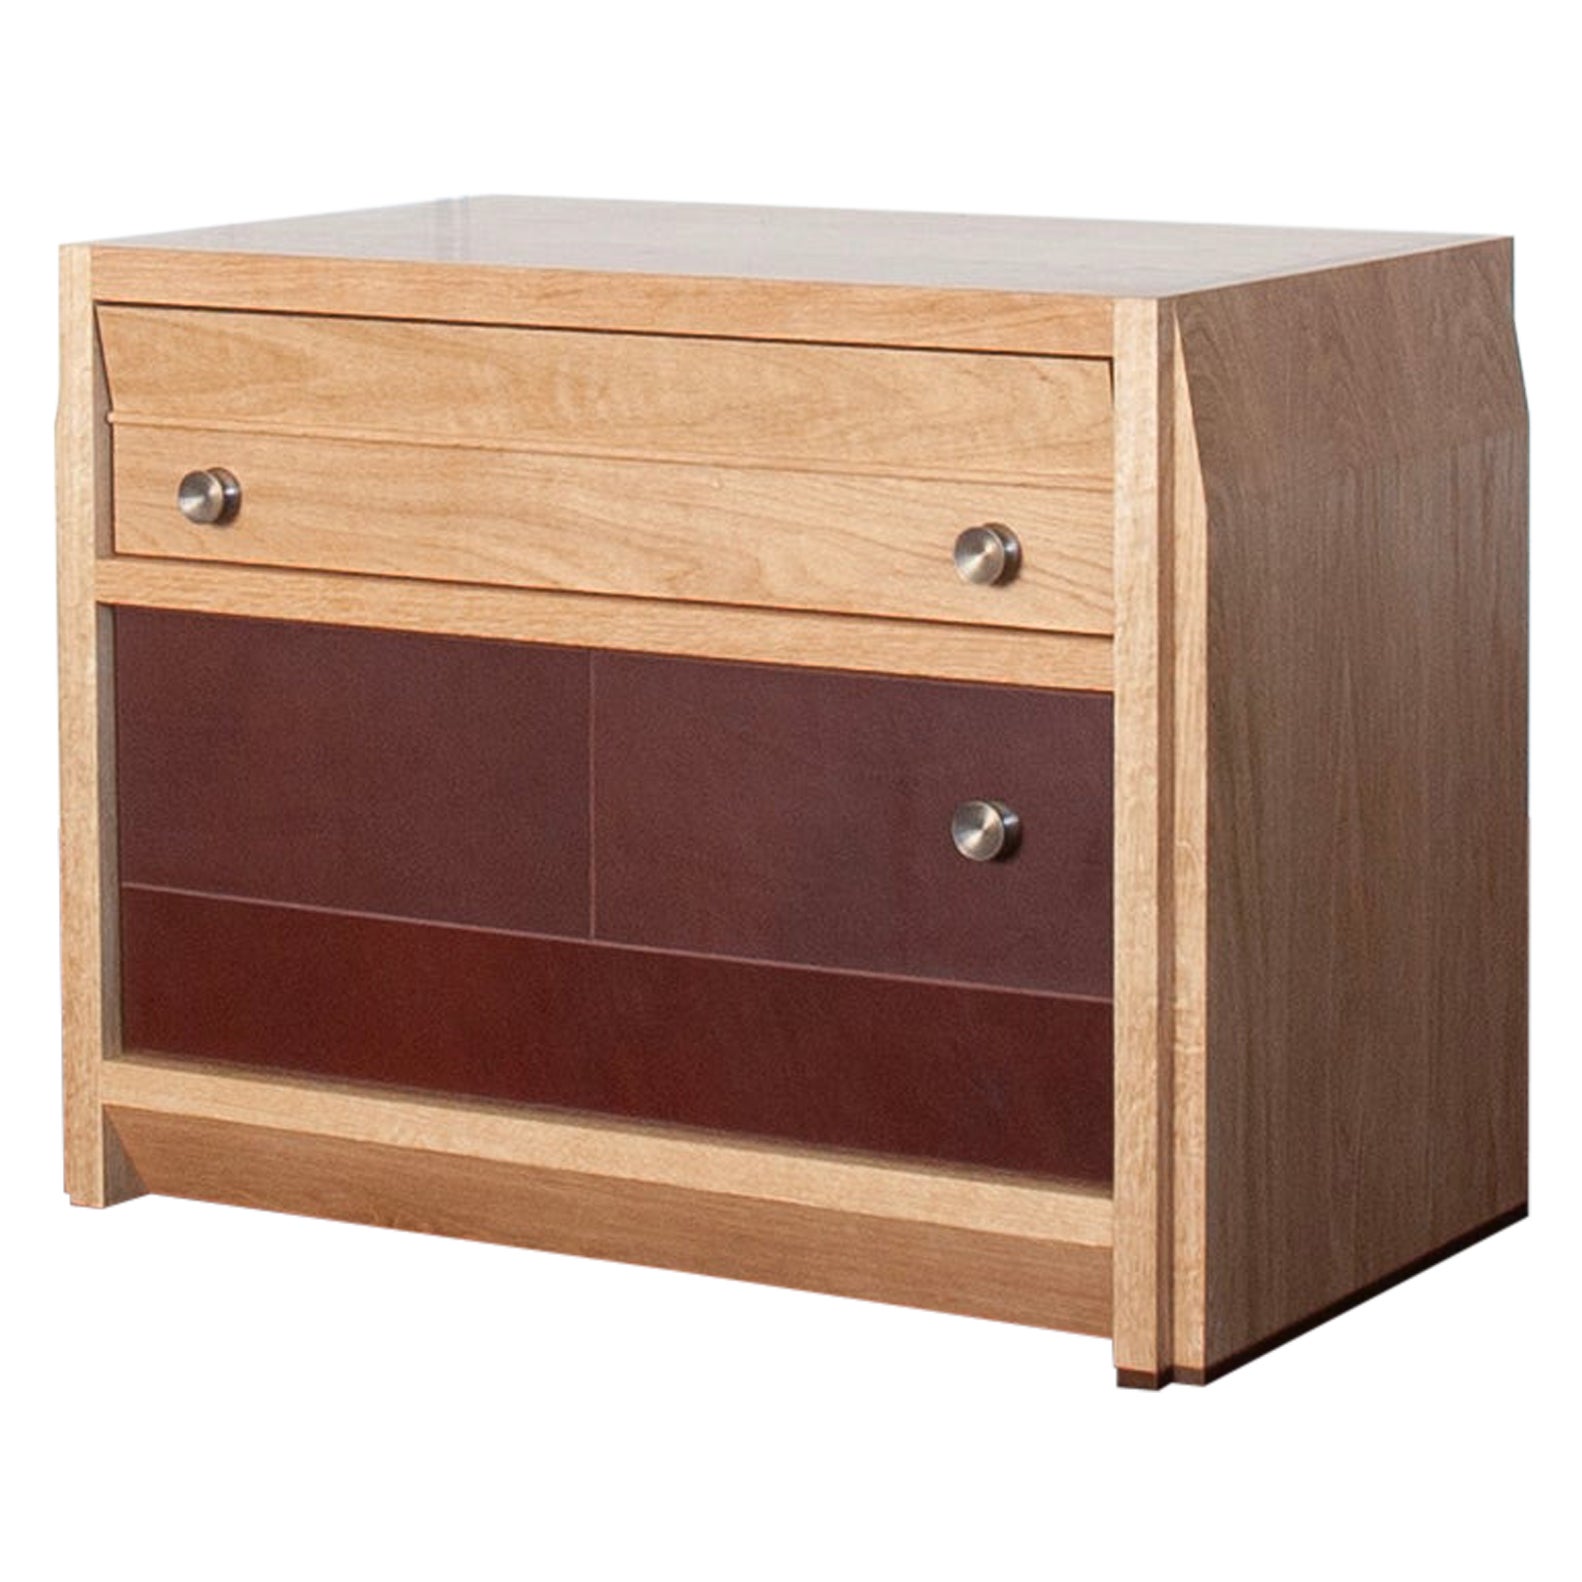 Octavia solid wood and leather nightstand and endtable by Crump and Kwash 